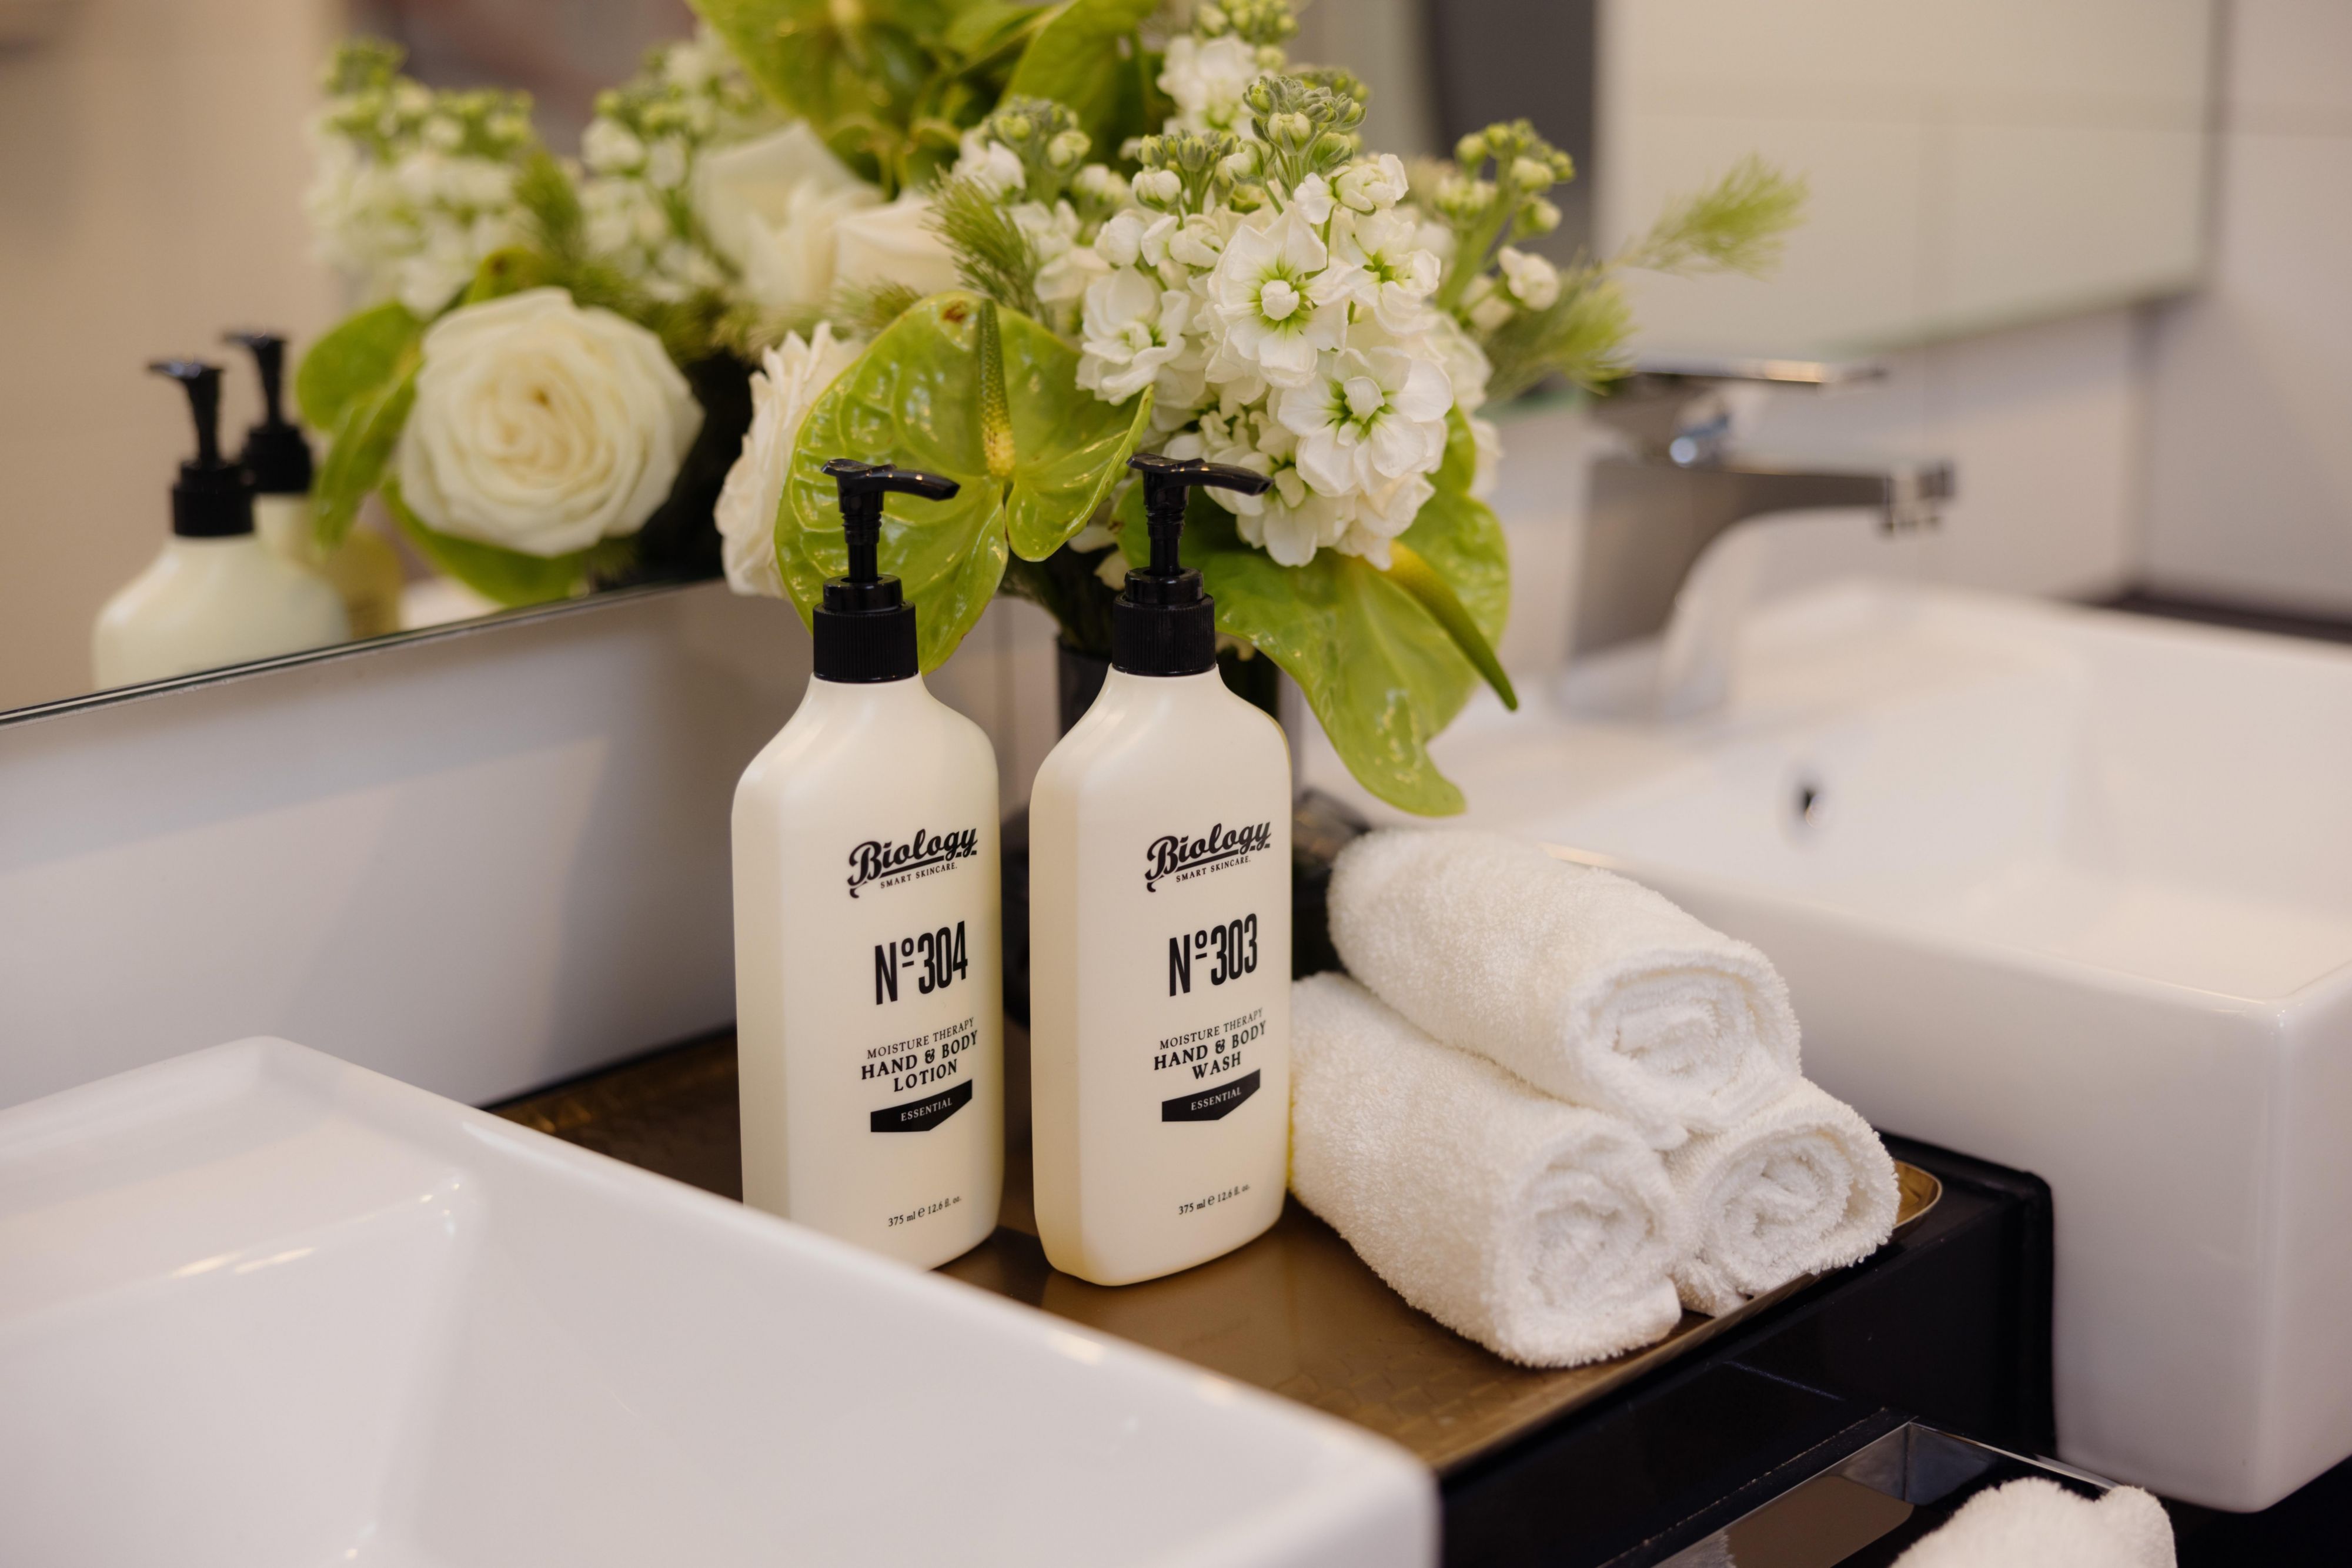 At Hotel Indigo Melbourne on Flinders, our team actively looks to reduce our environmental footprint through a range of in-house initiatives. We look to help give our guests a greener stay by removing single-use toiletries which have been replaced by bulk amenities. We've also ditched plastic bottles in favour of glass ones.